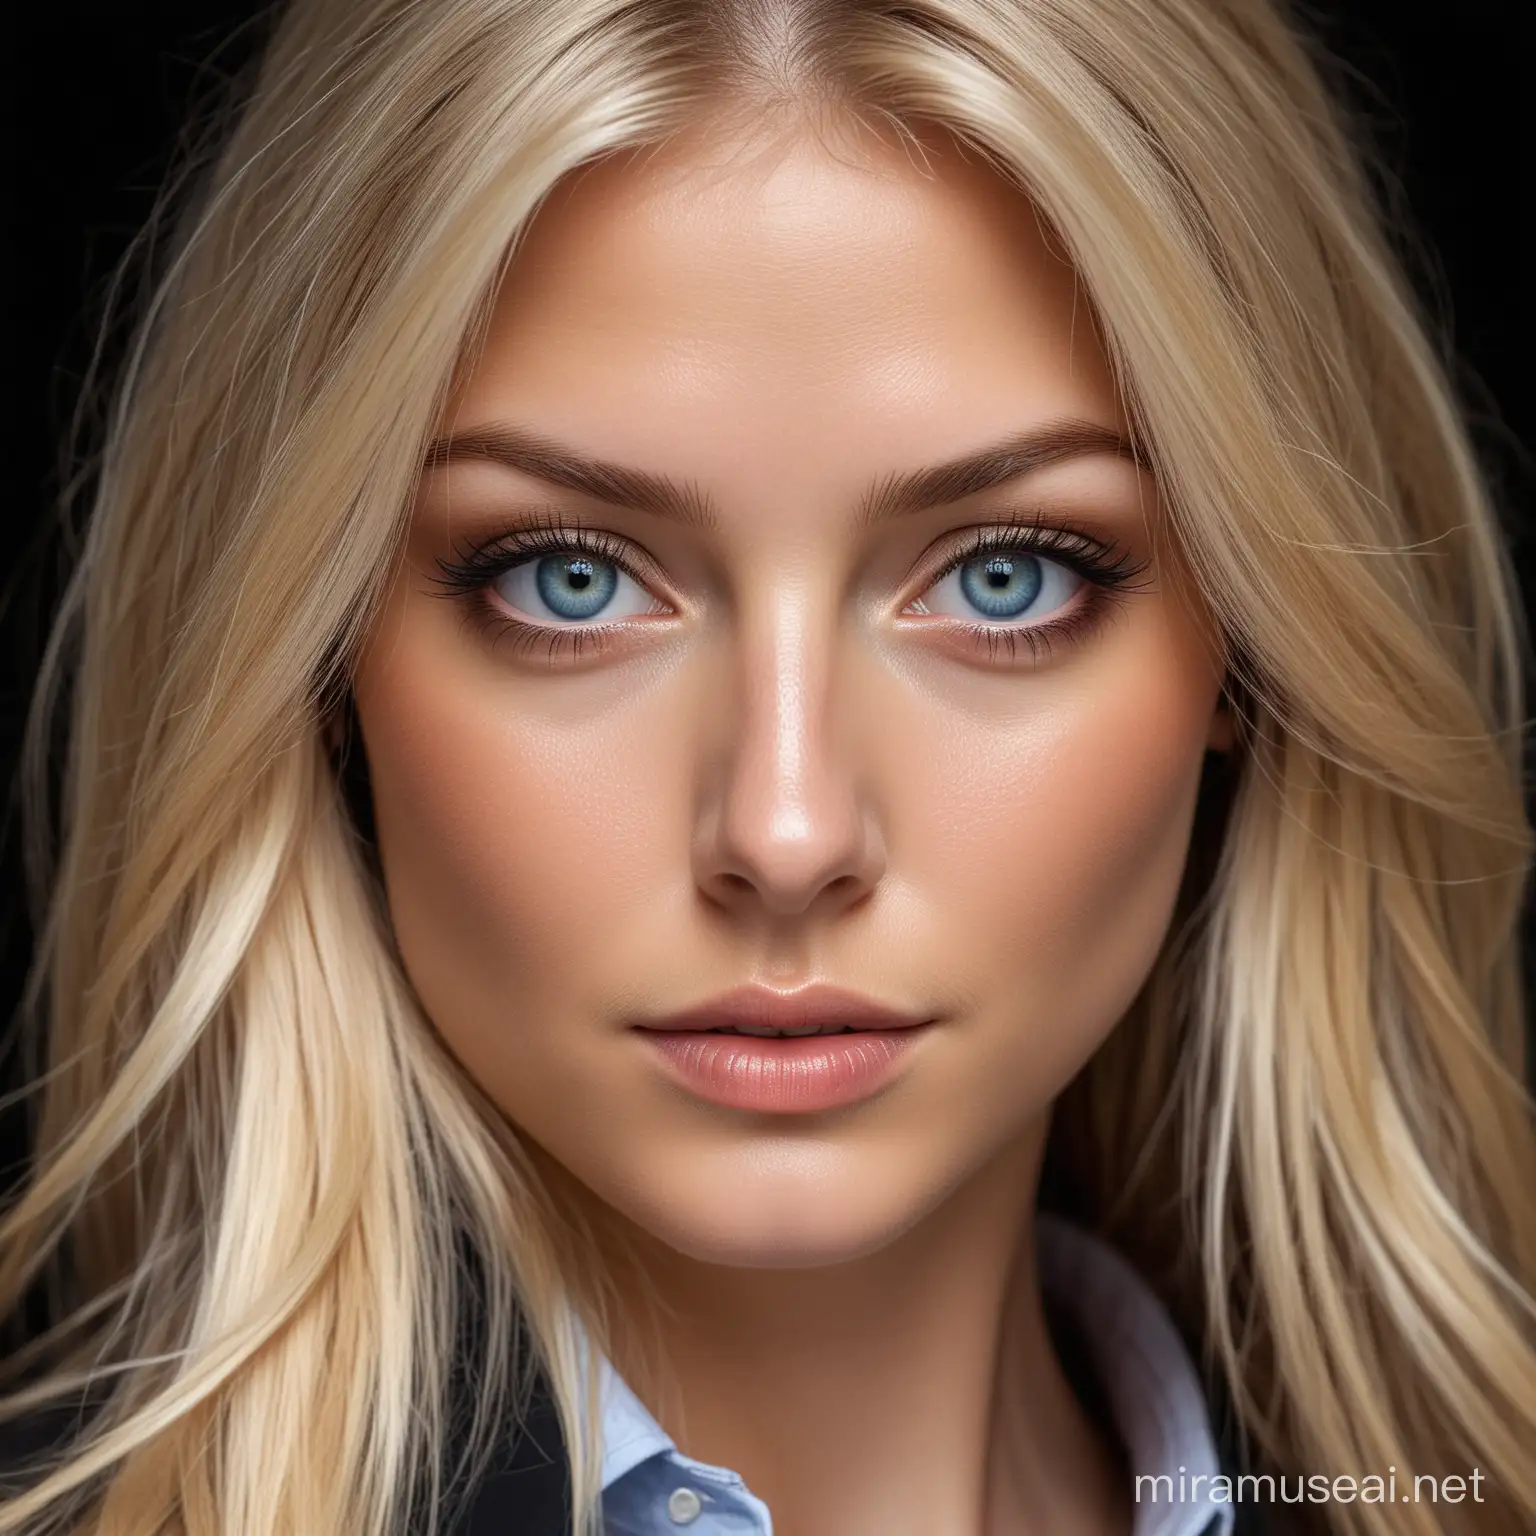 full body, a ultra real full body shot photo of 30 years old business women, blue eyes, long blonde hair. At the background a ultra close up macro details, ultra contrast, of ultra dark decor. Intricate details of her beautiful eyes and perfect face. The most beautiful women.